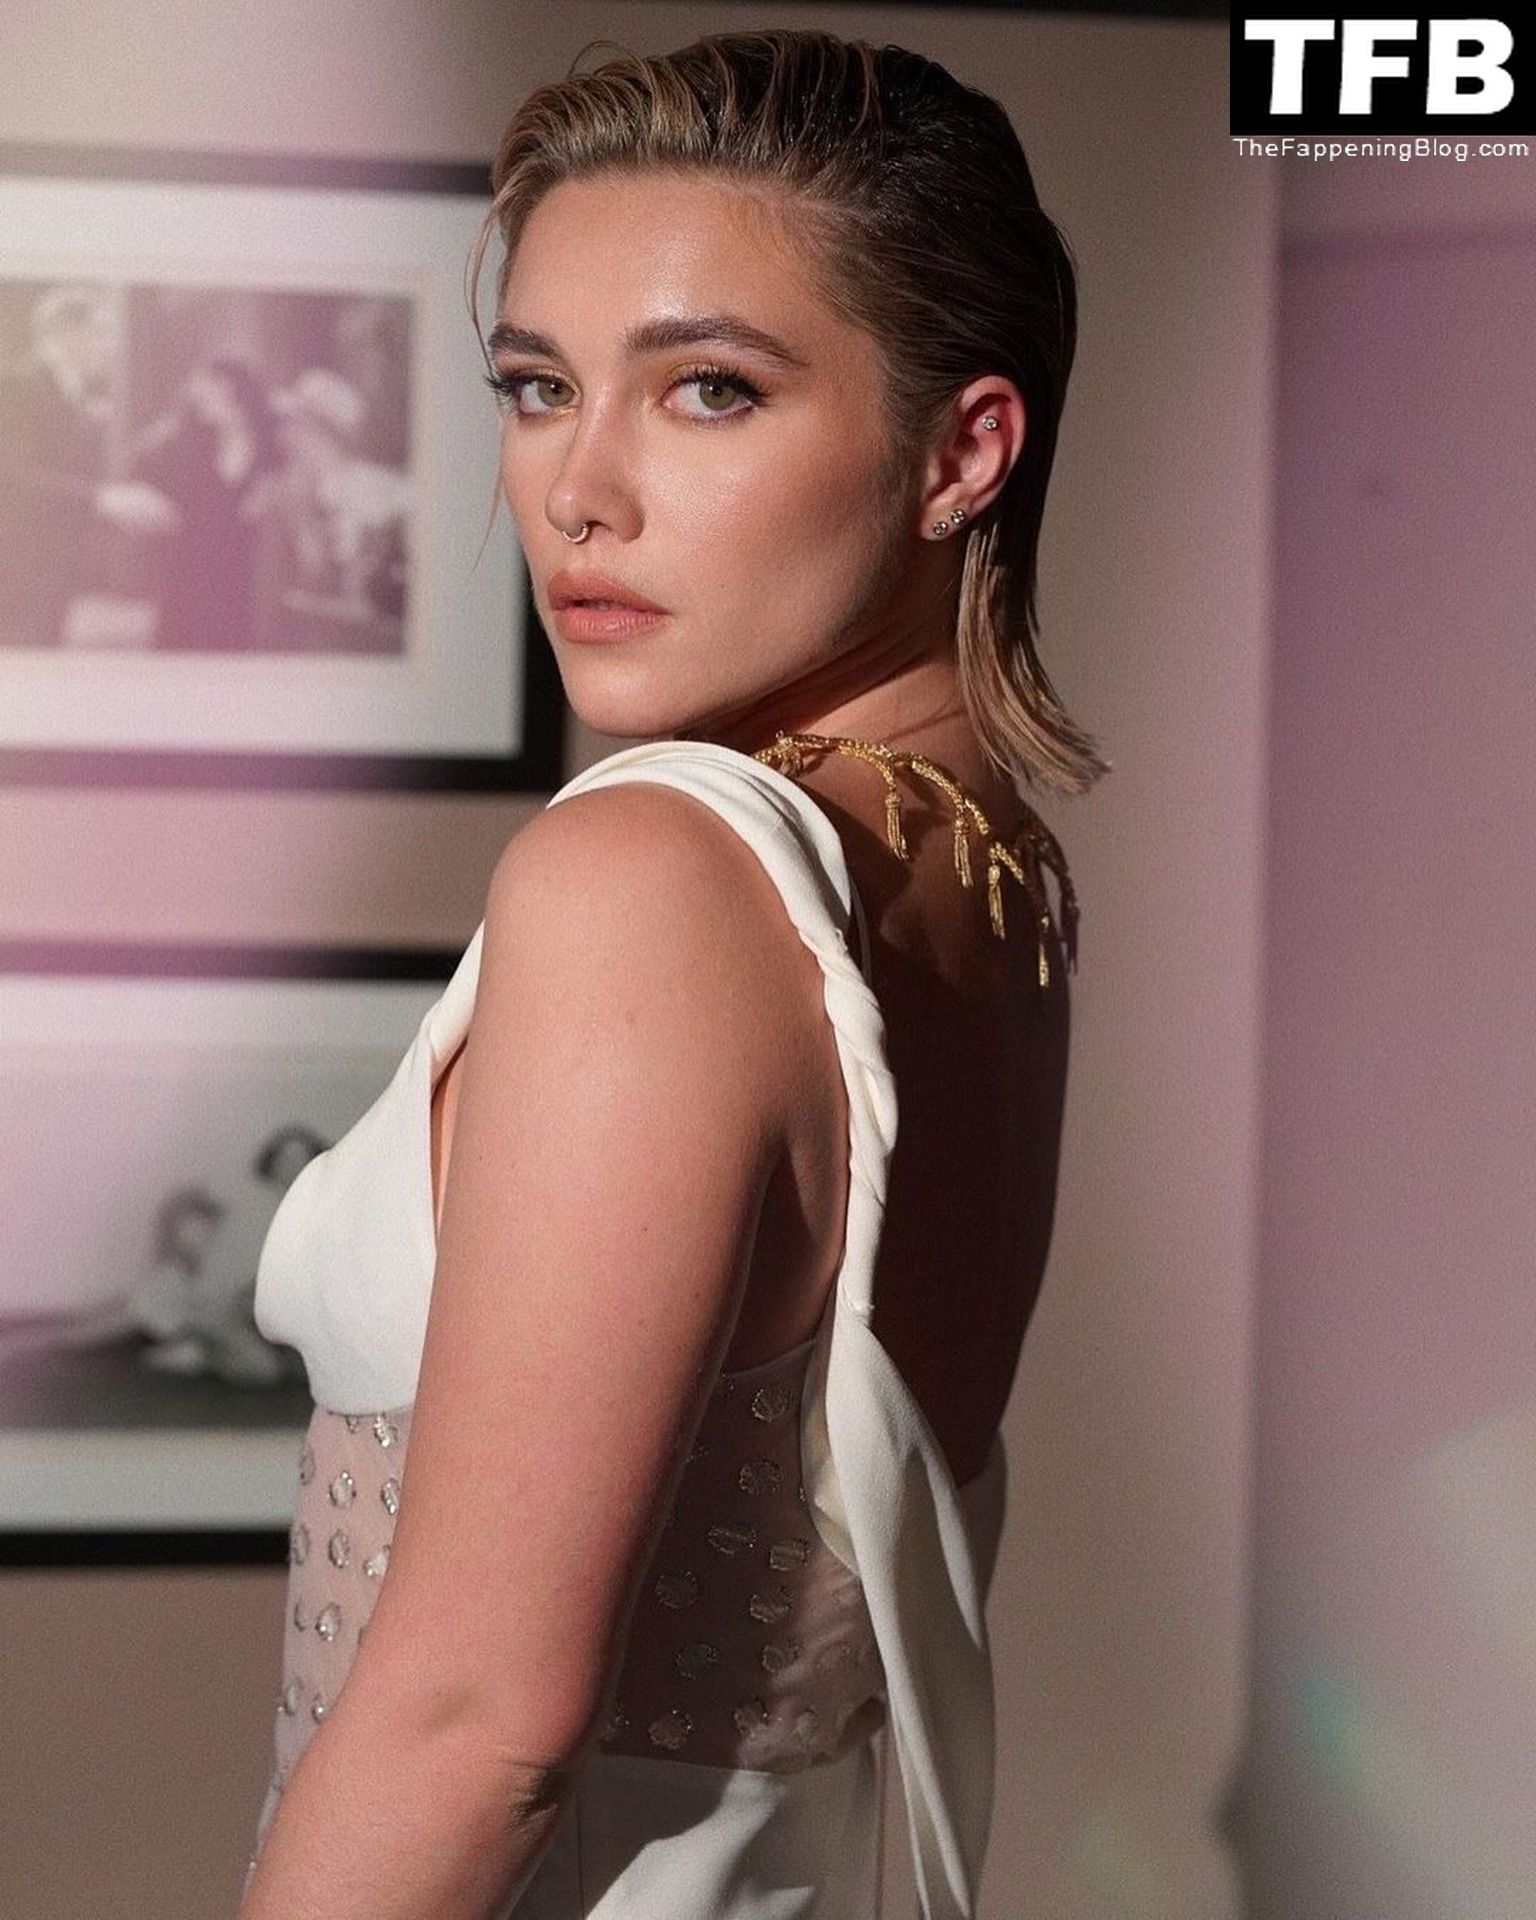 Florence-Pugh-Sexy-The-Fappening-Blog-22-1.jpg